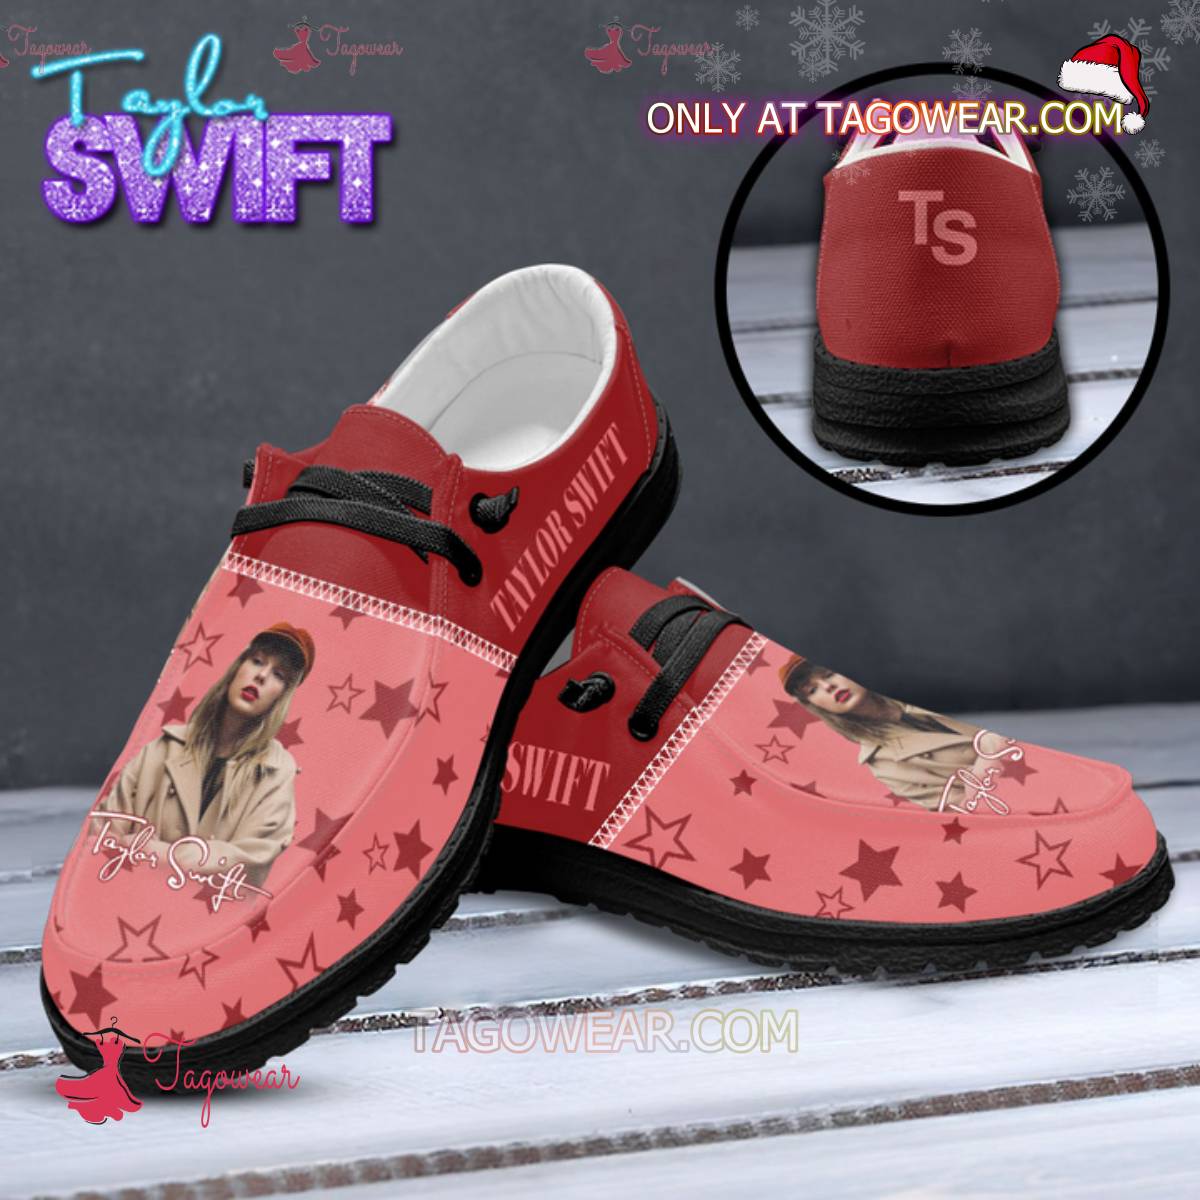 Taylor Swift Stars Hey Dude Shoes a